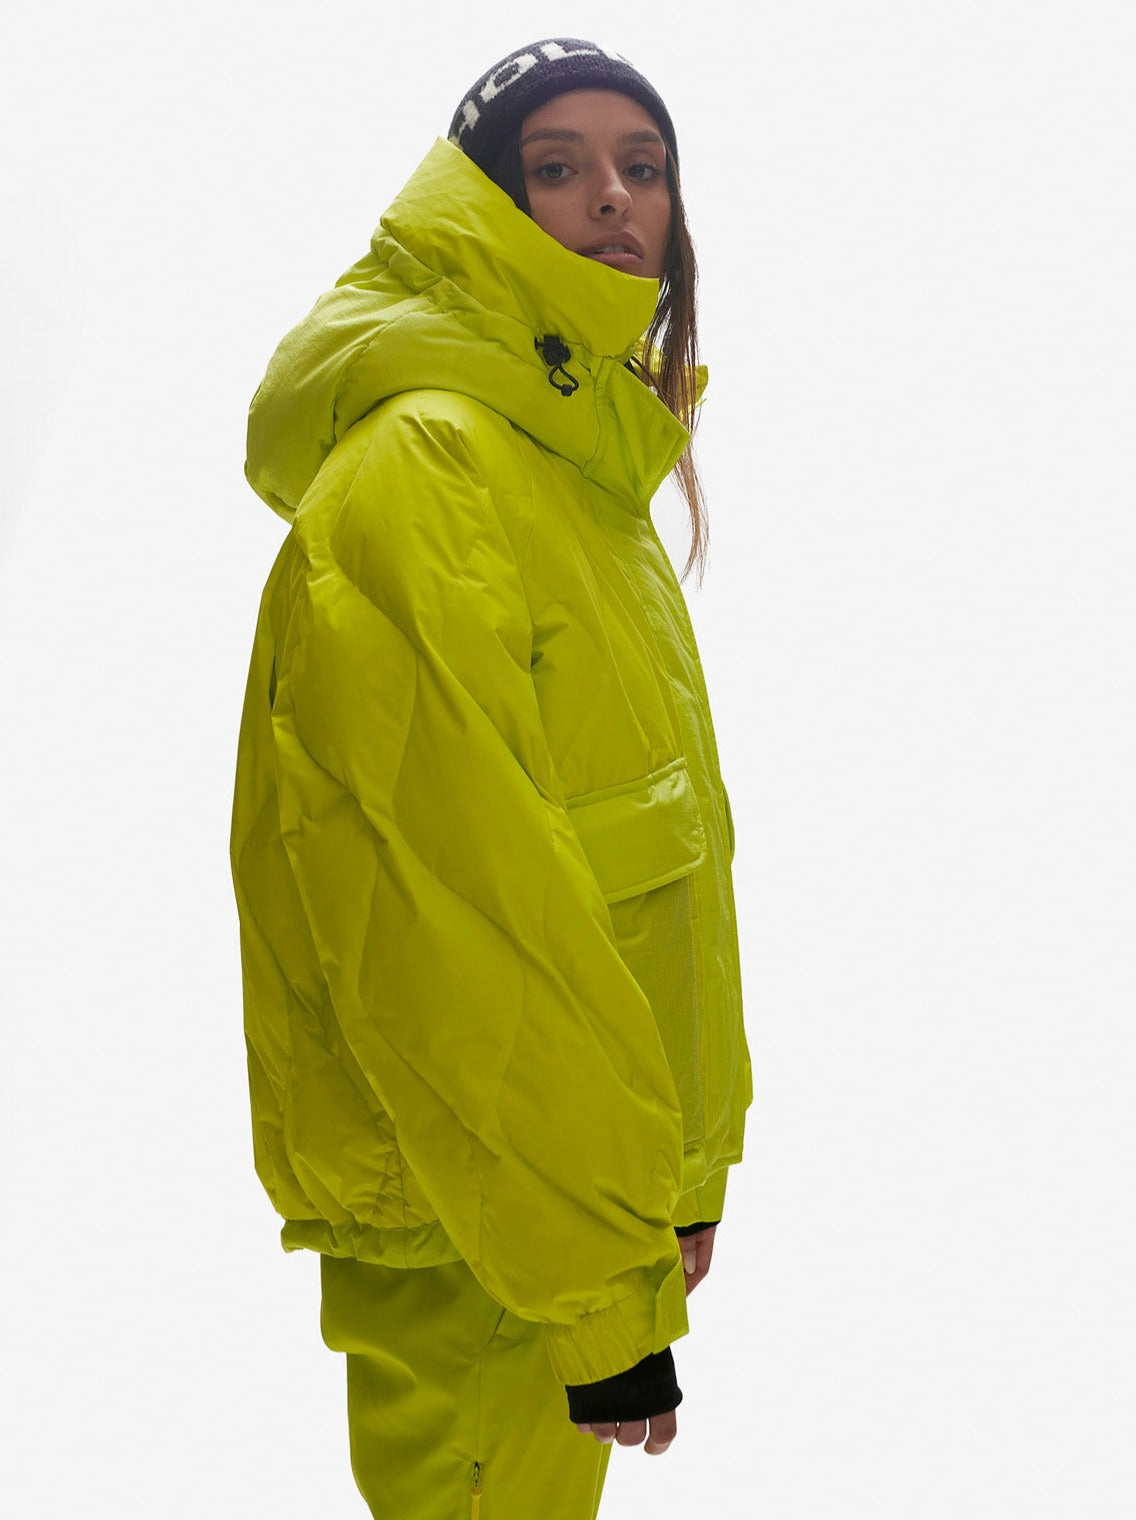 Women's Alpine Puffer - Mineral Yellow - right side